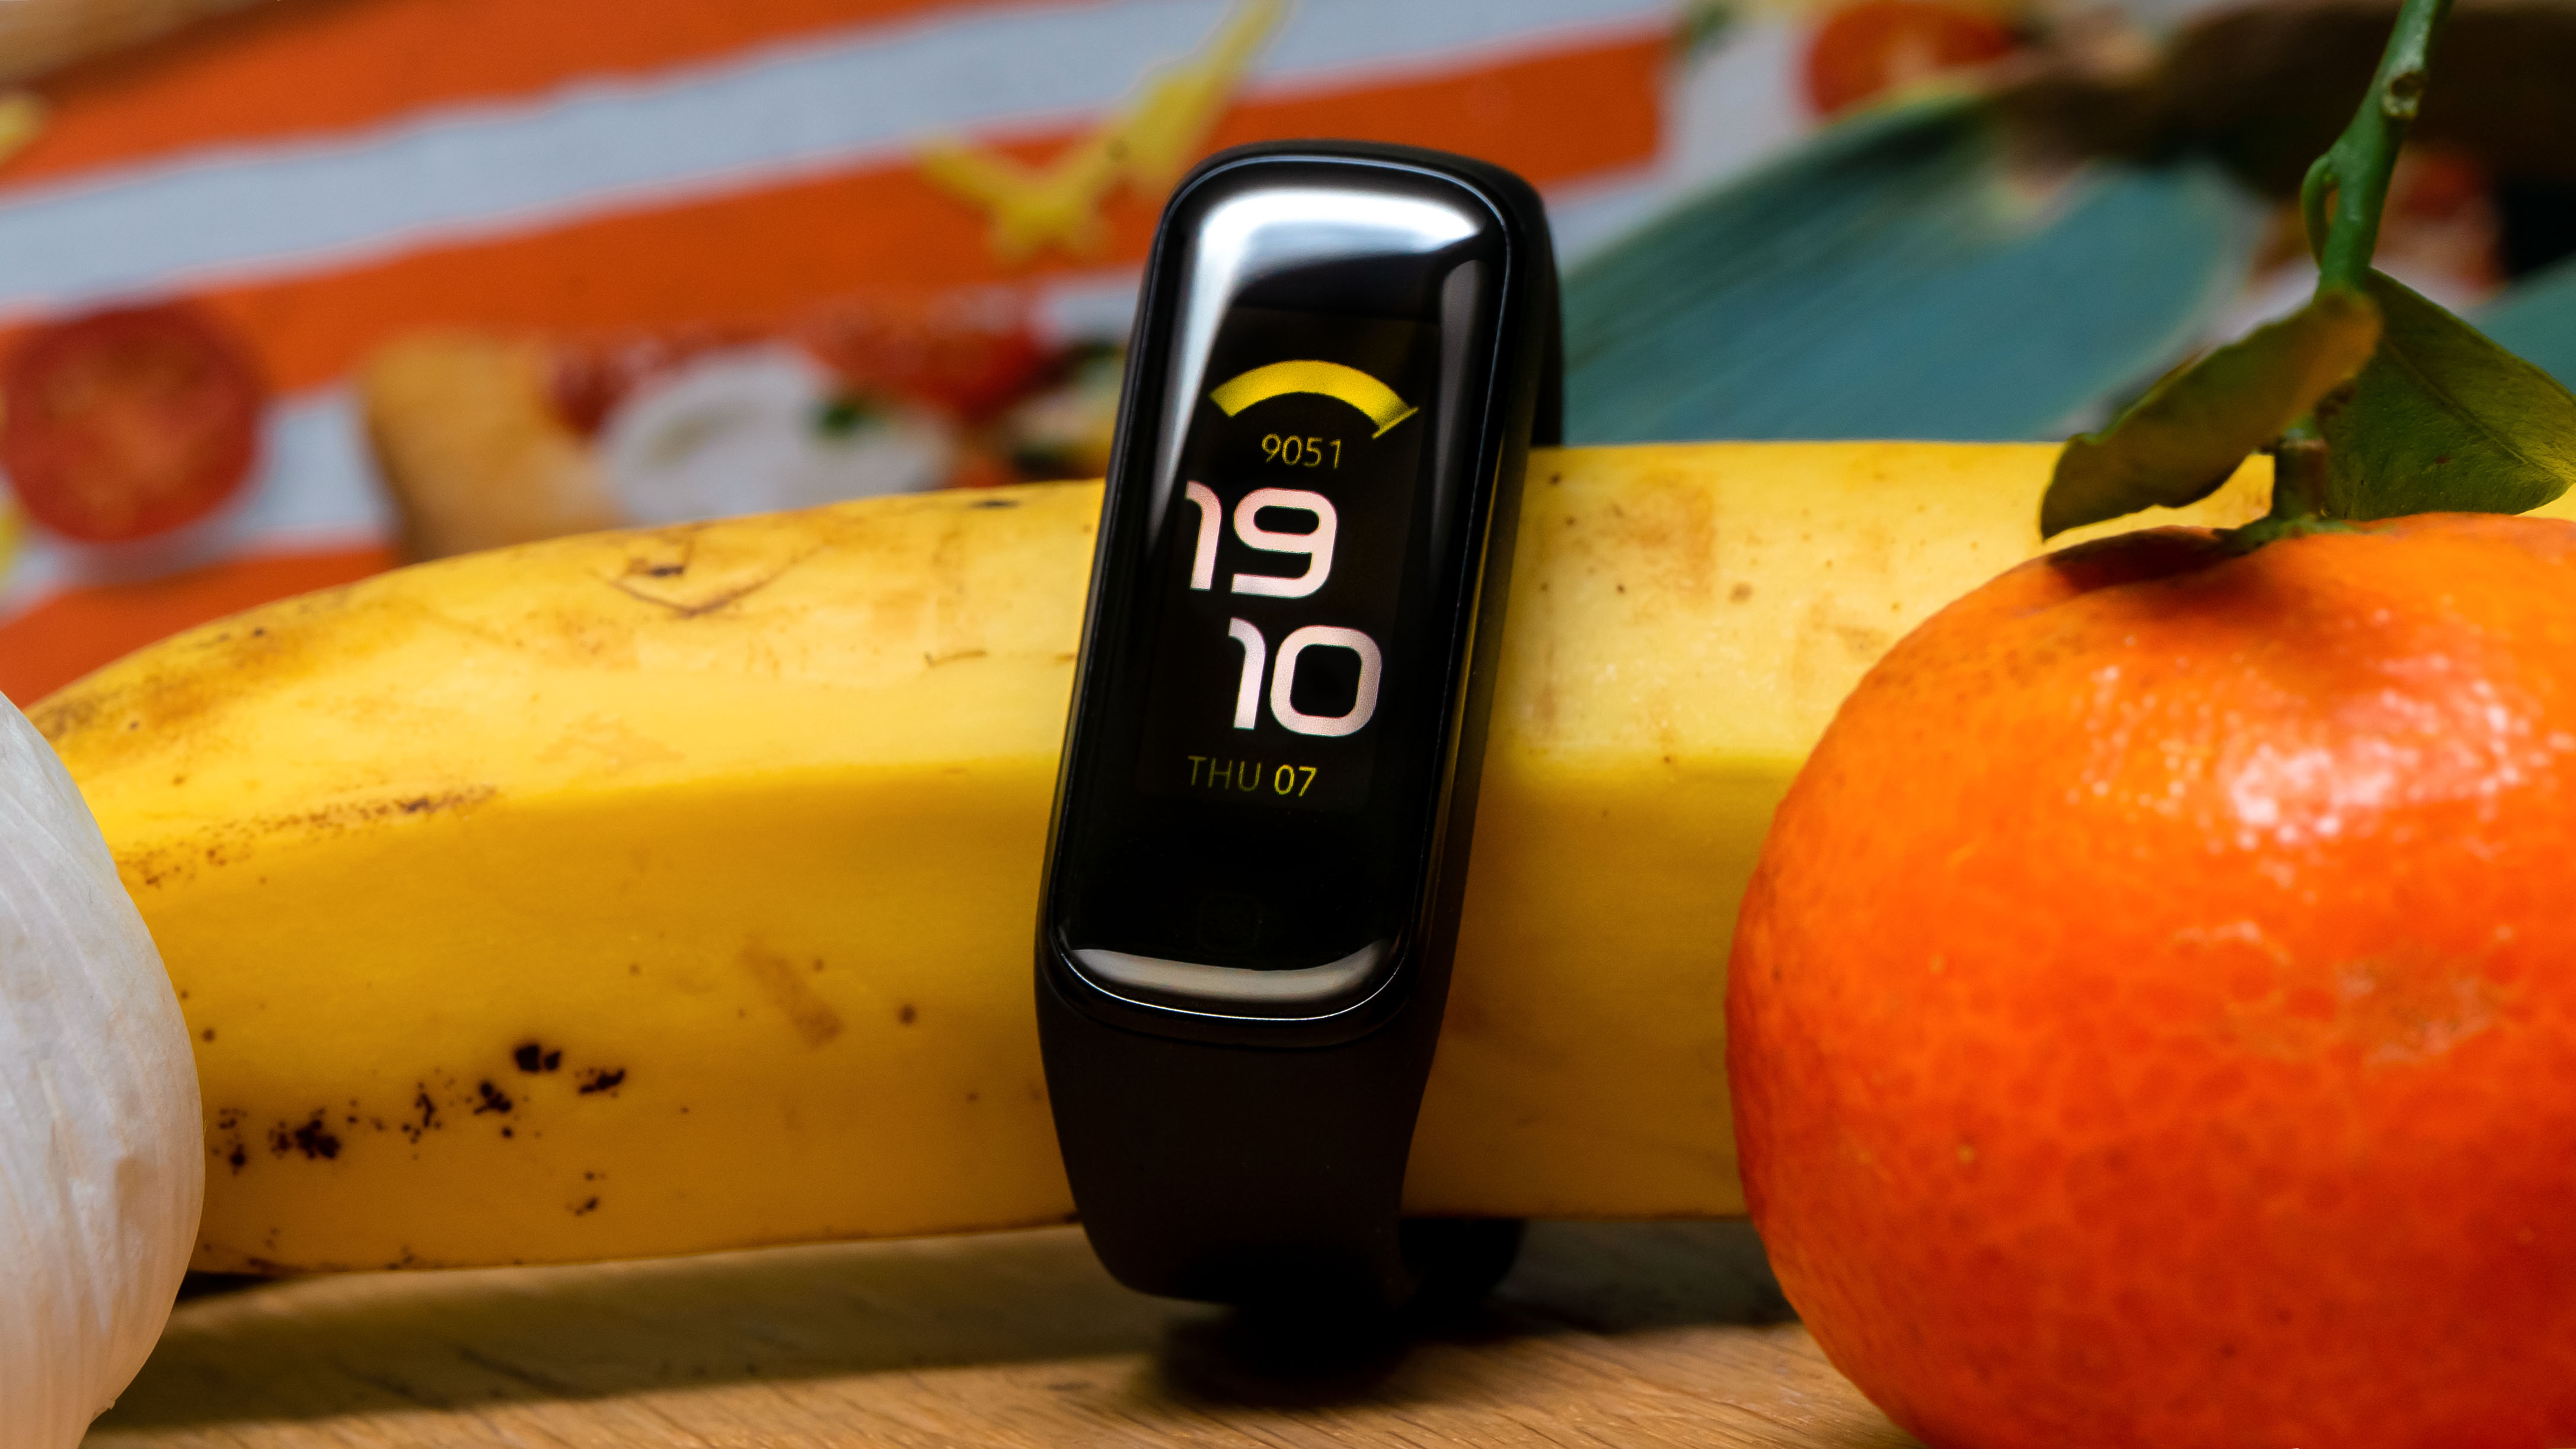 Samsung Galaxy Fit 2 review: a great-looking budget tracker